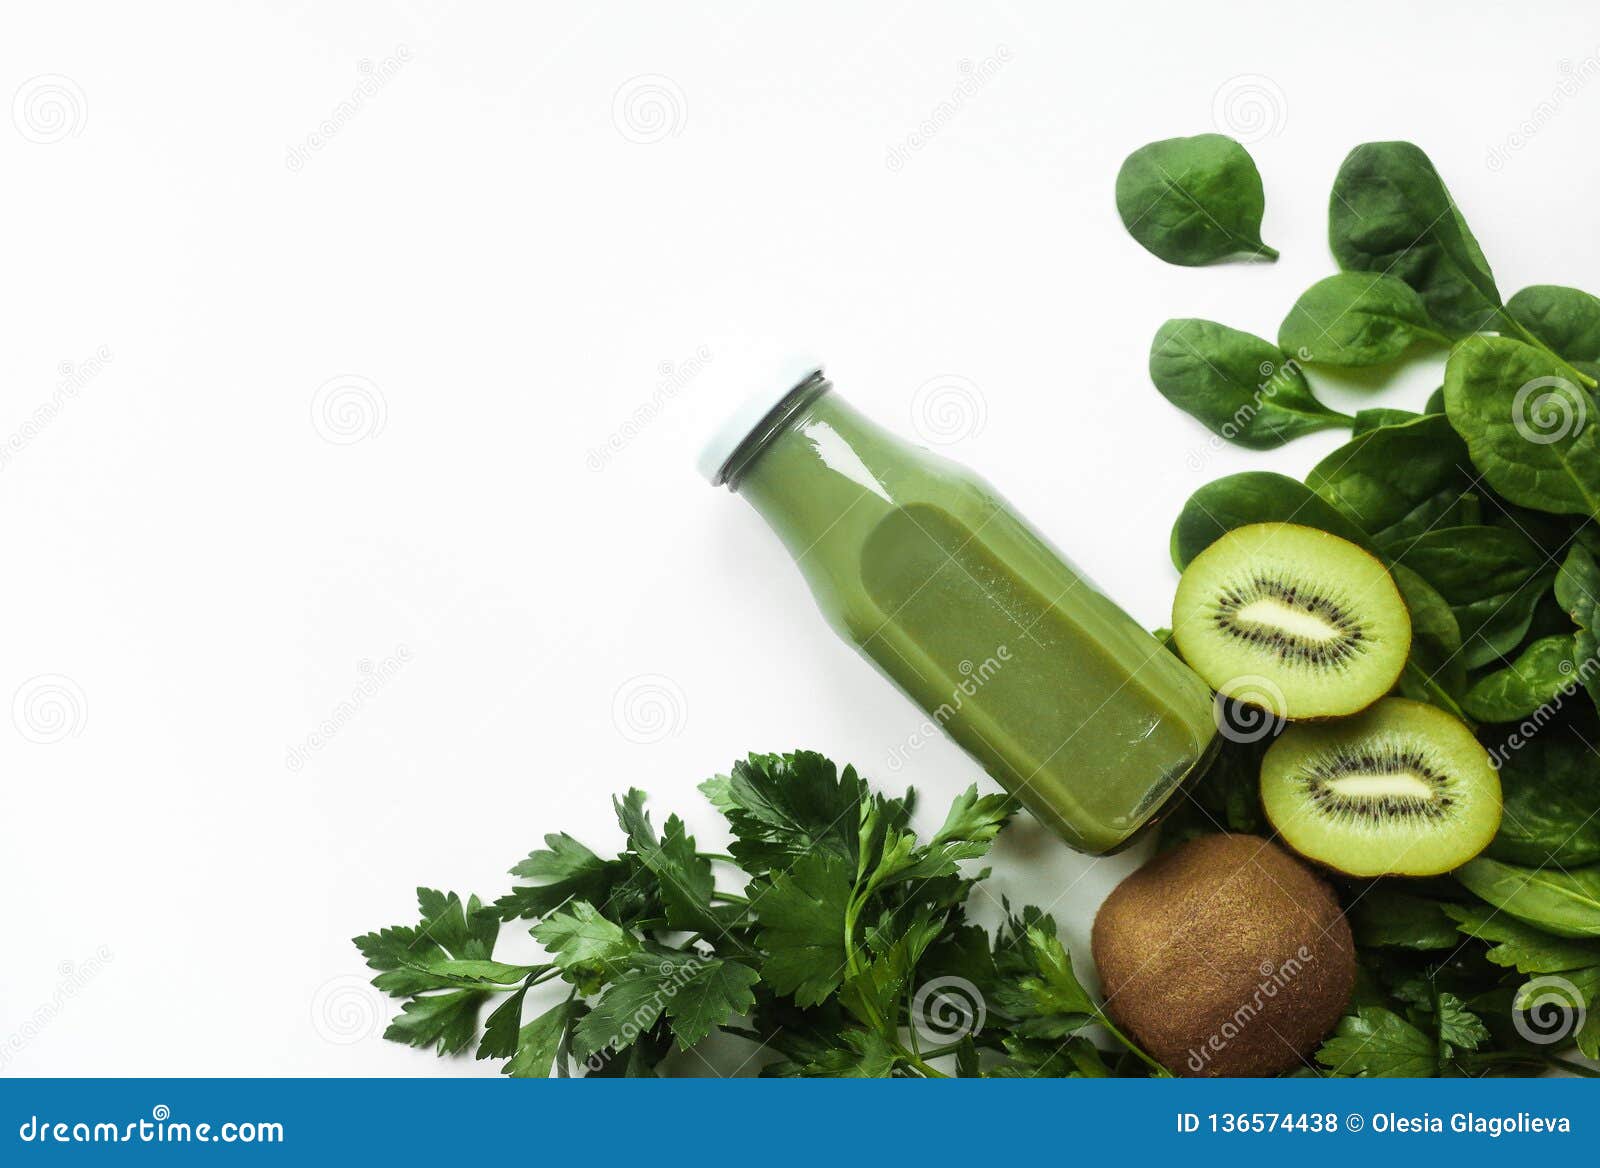 healthy green smoothie or juice and ingredients on white - superfoods, detox, diet, health, vegetarian food concept. copy space